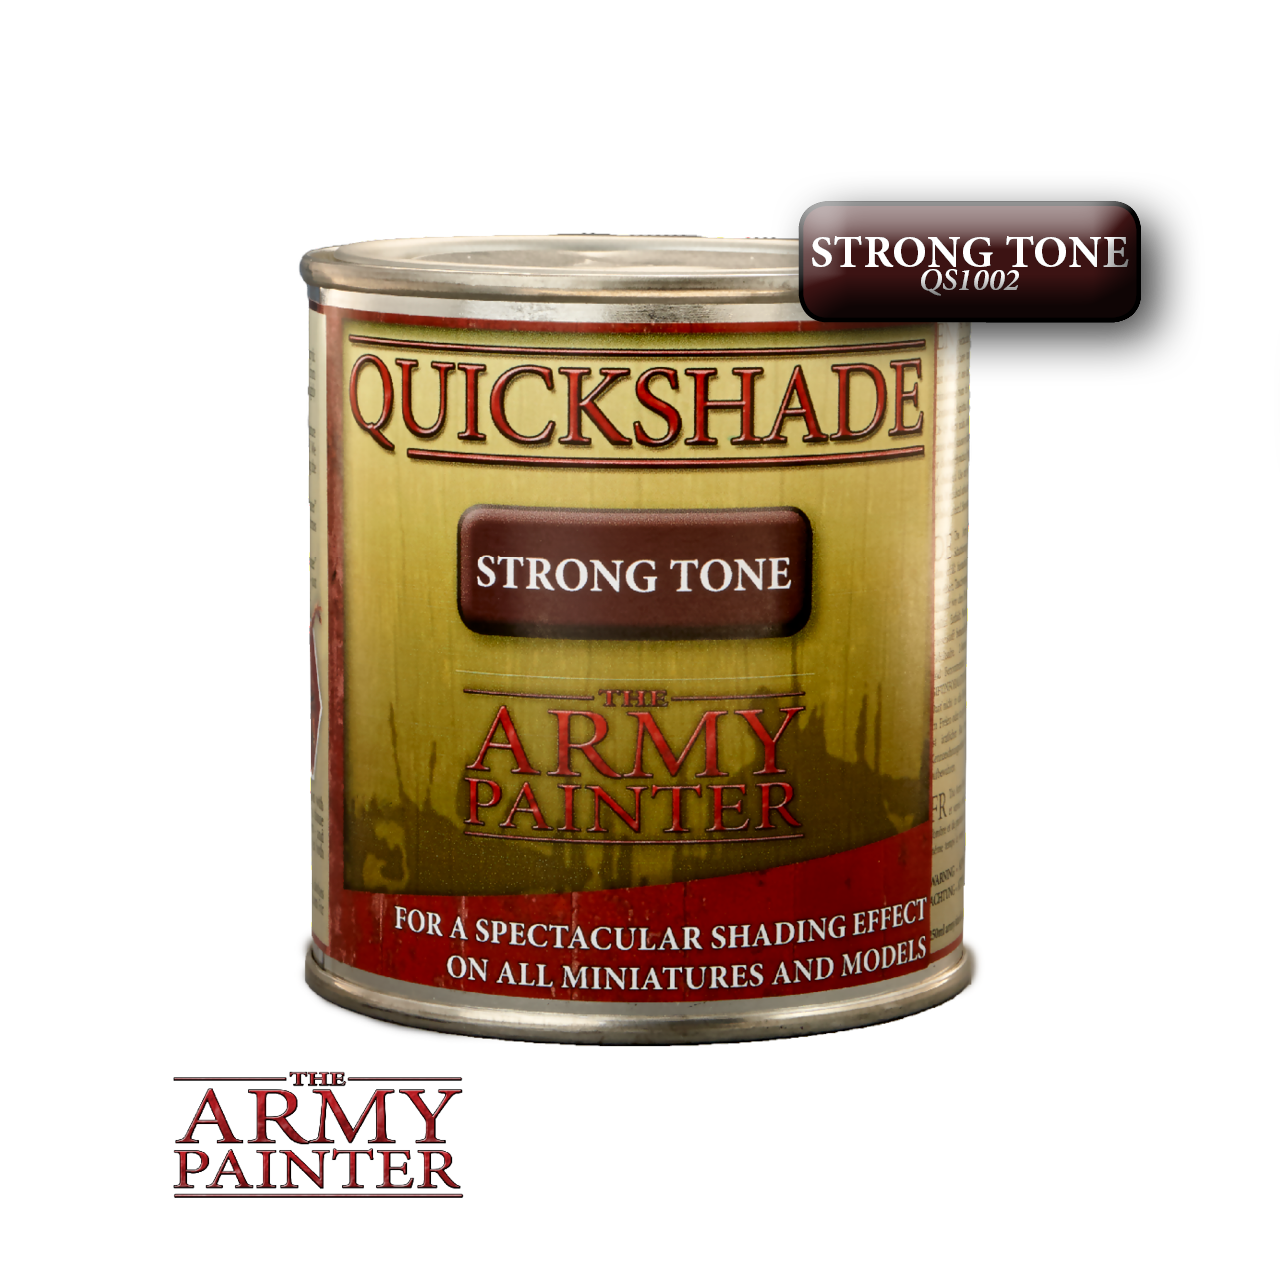 The Army Painter quickshade- strong tone 250ml